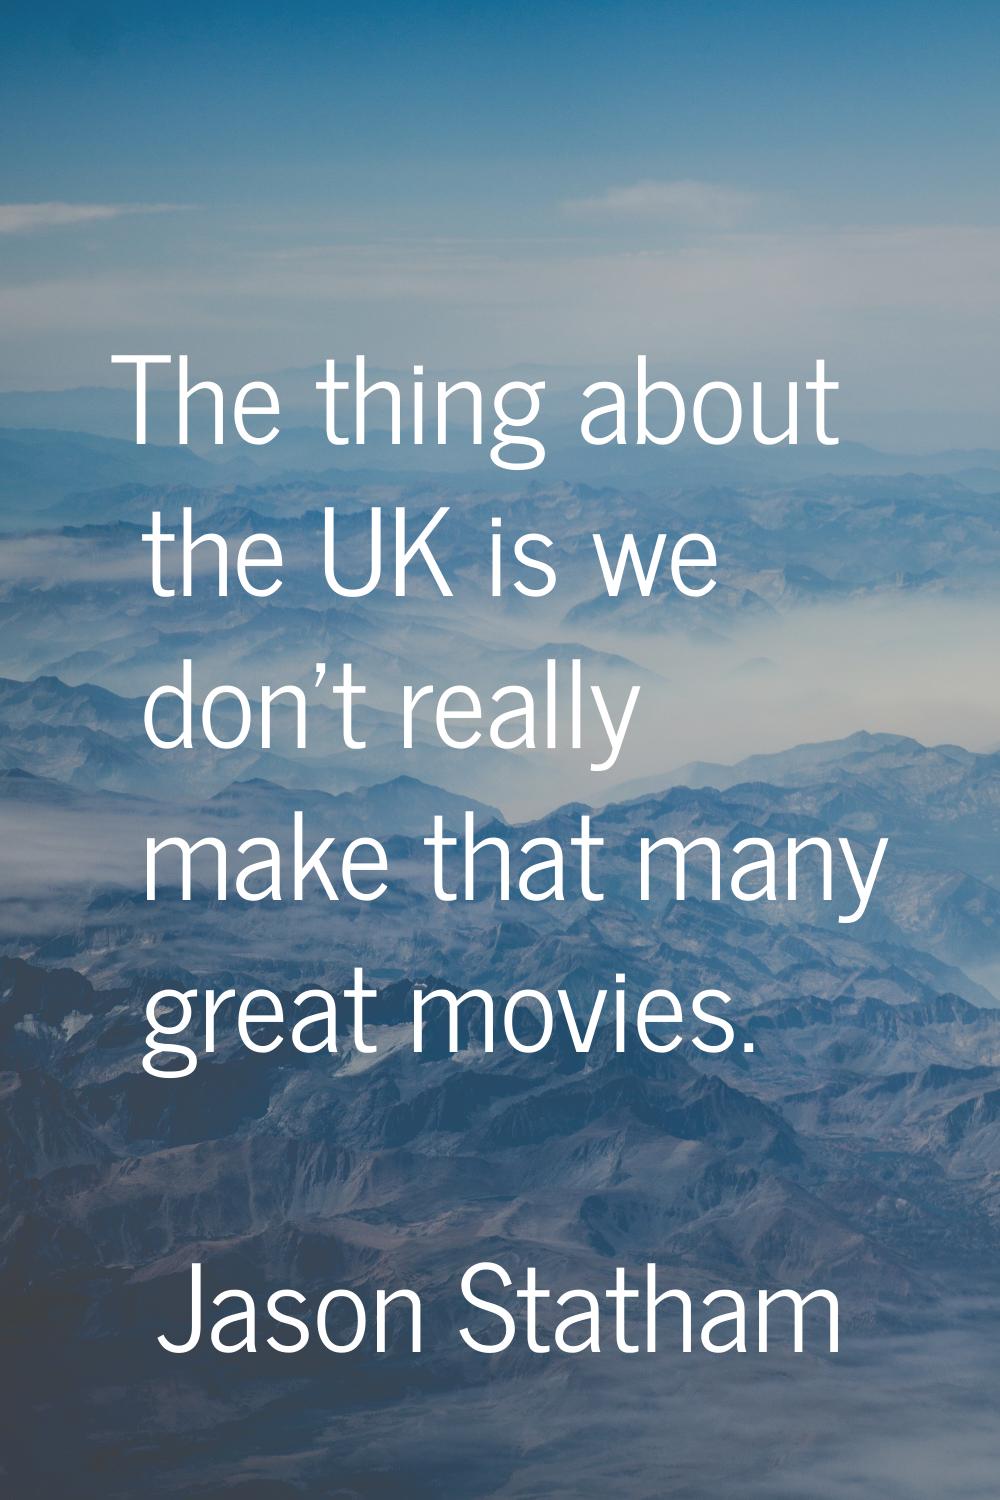 The thing about the UK is we don't really make that many great movies.